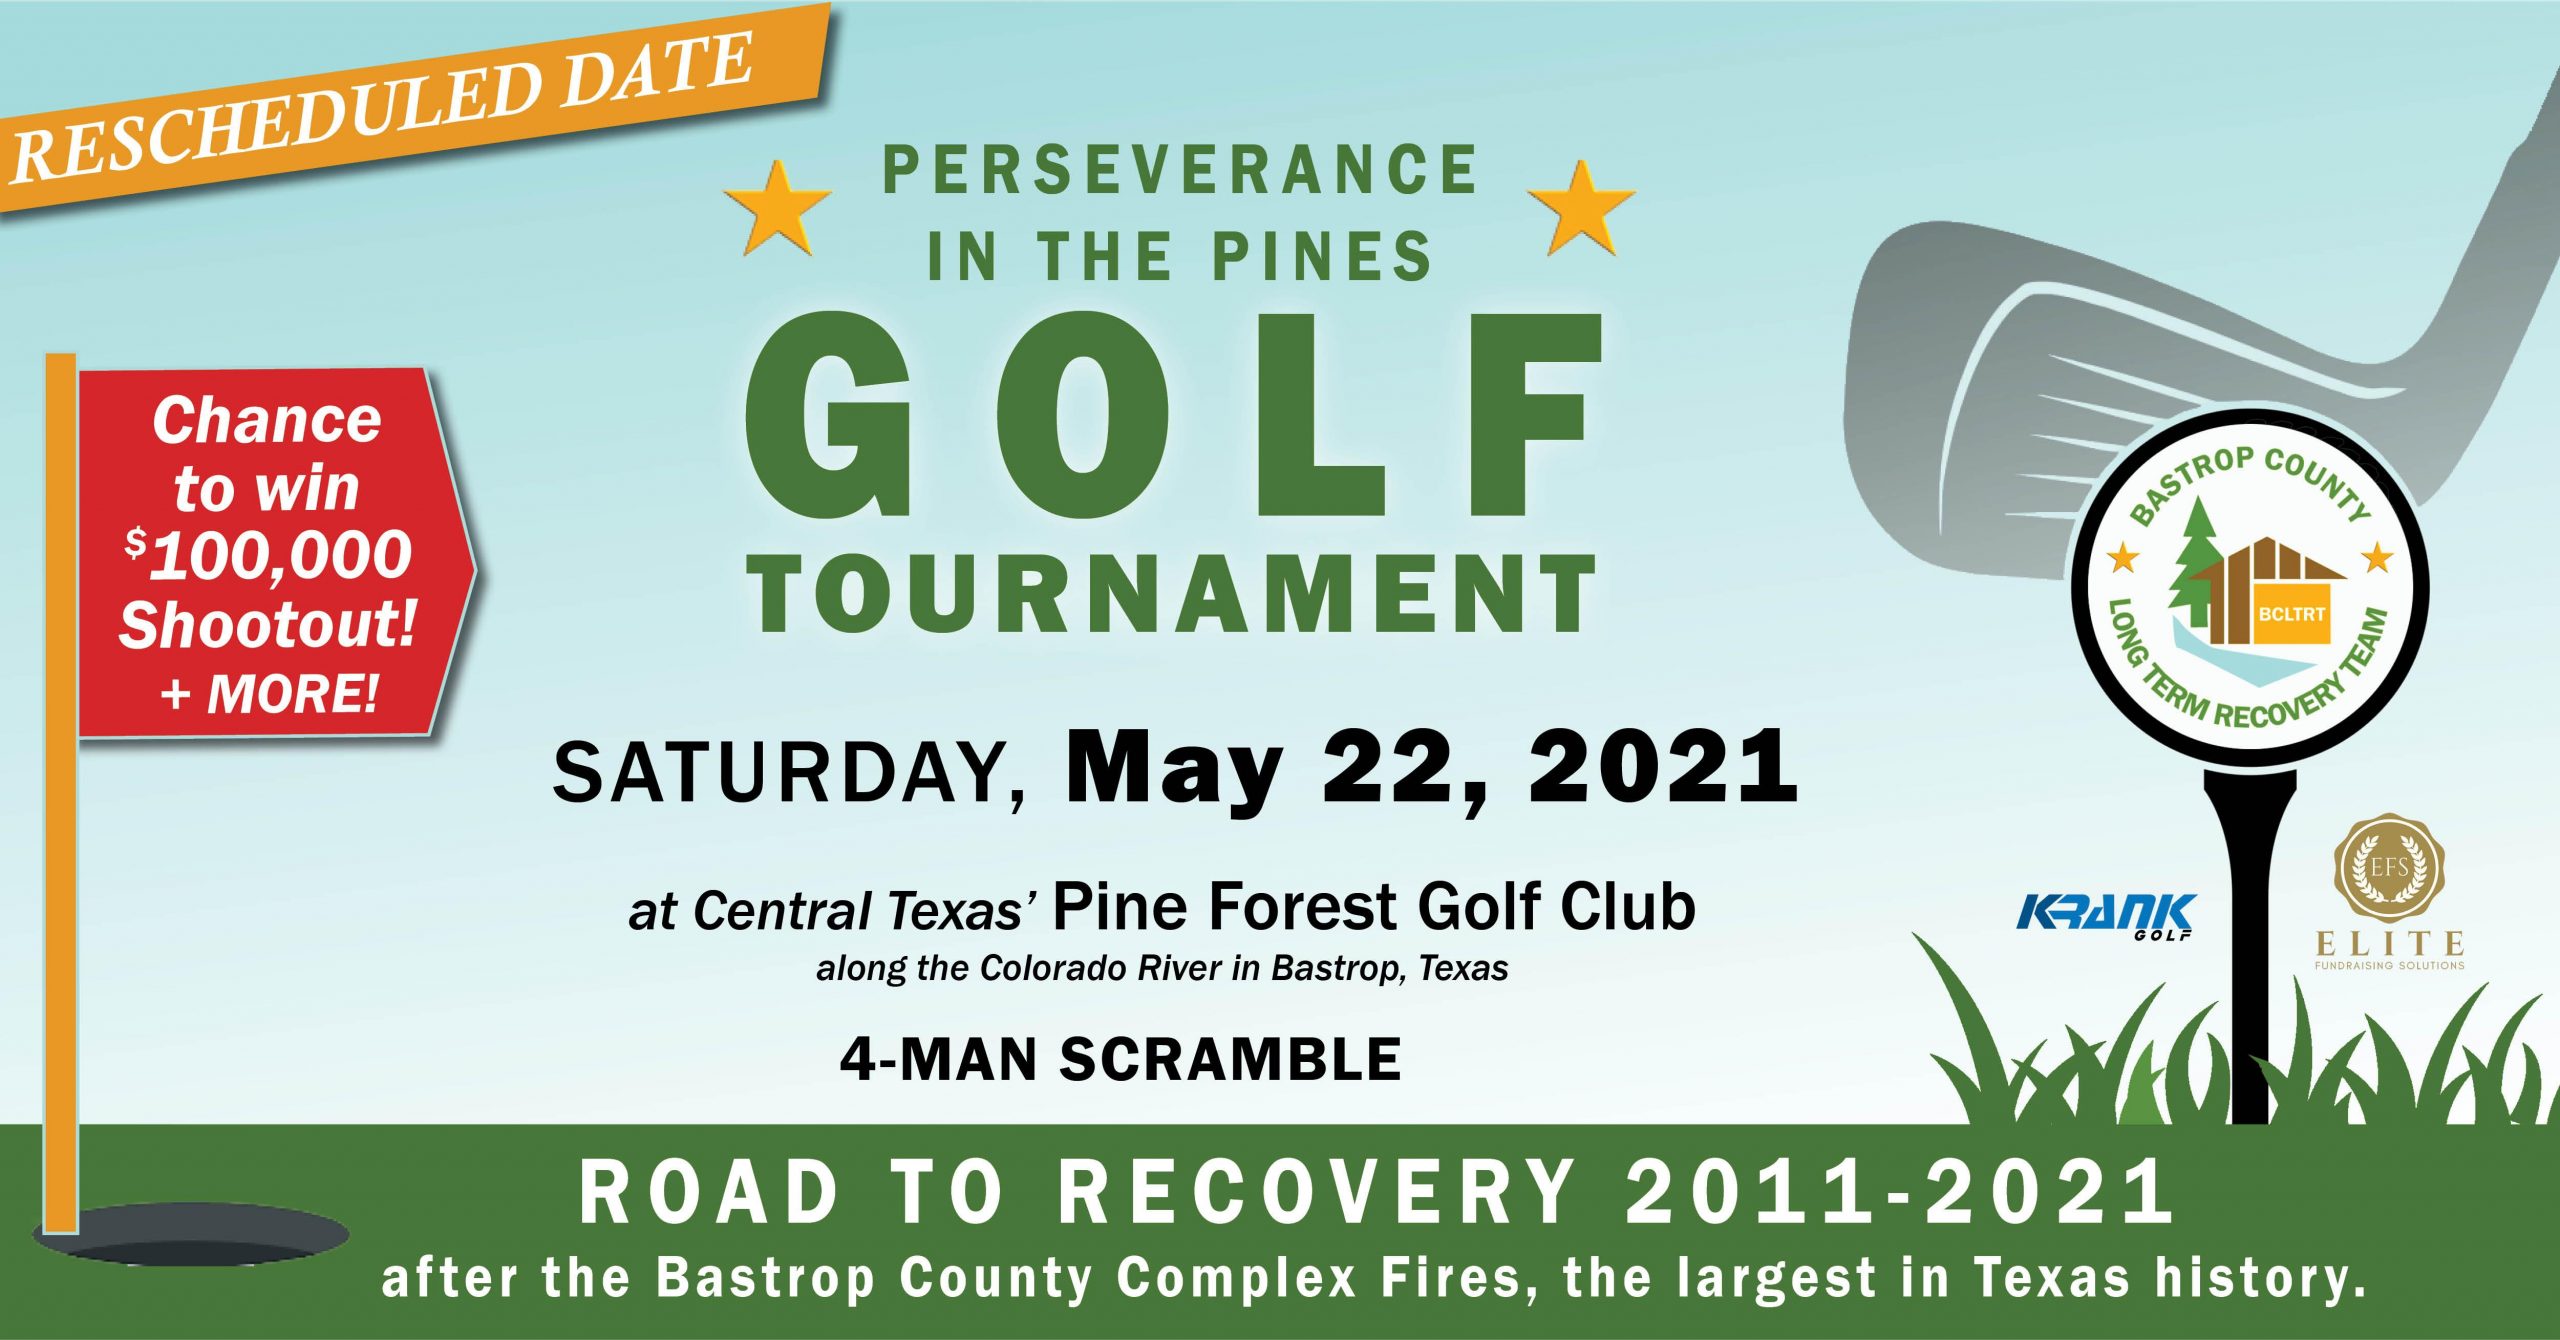 Perseverance in the Pines - Golf Tournament